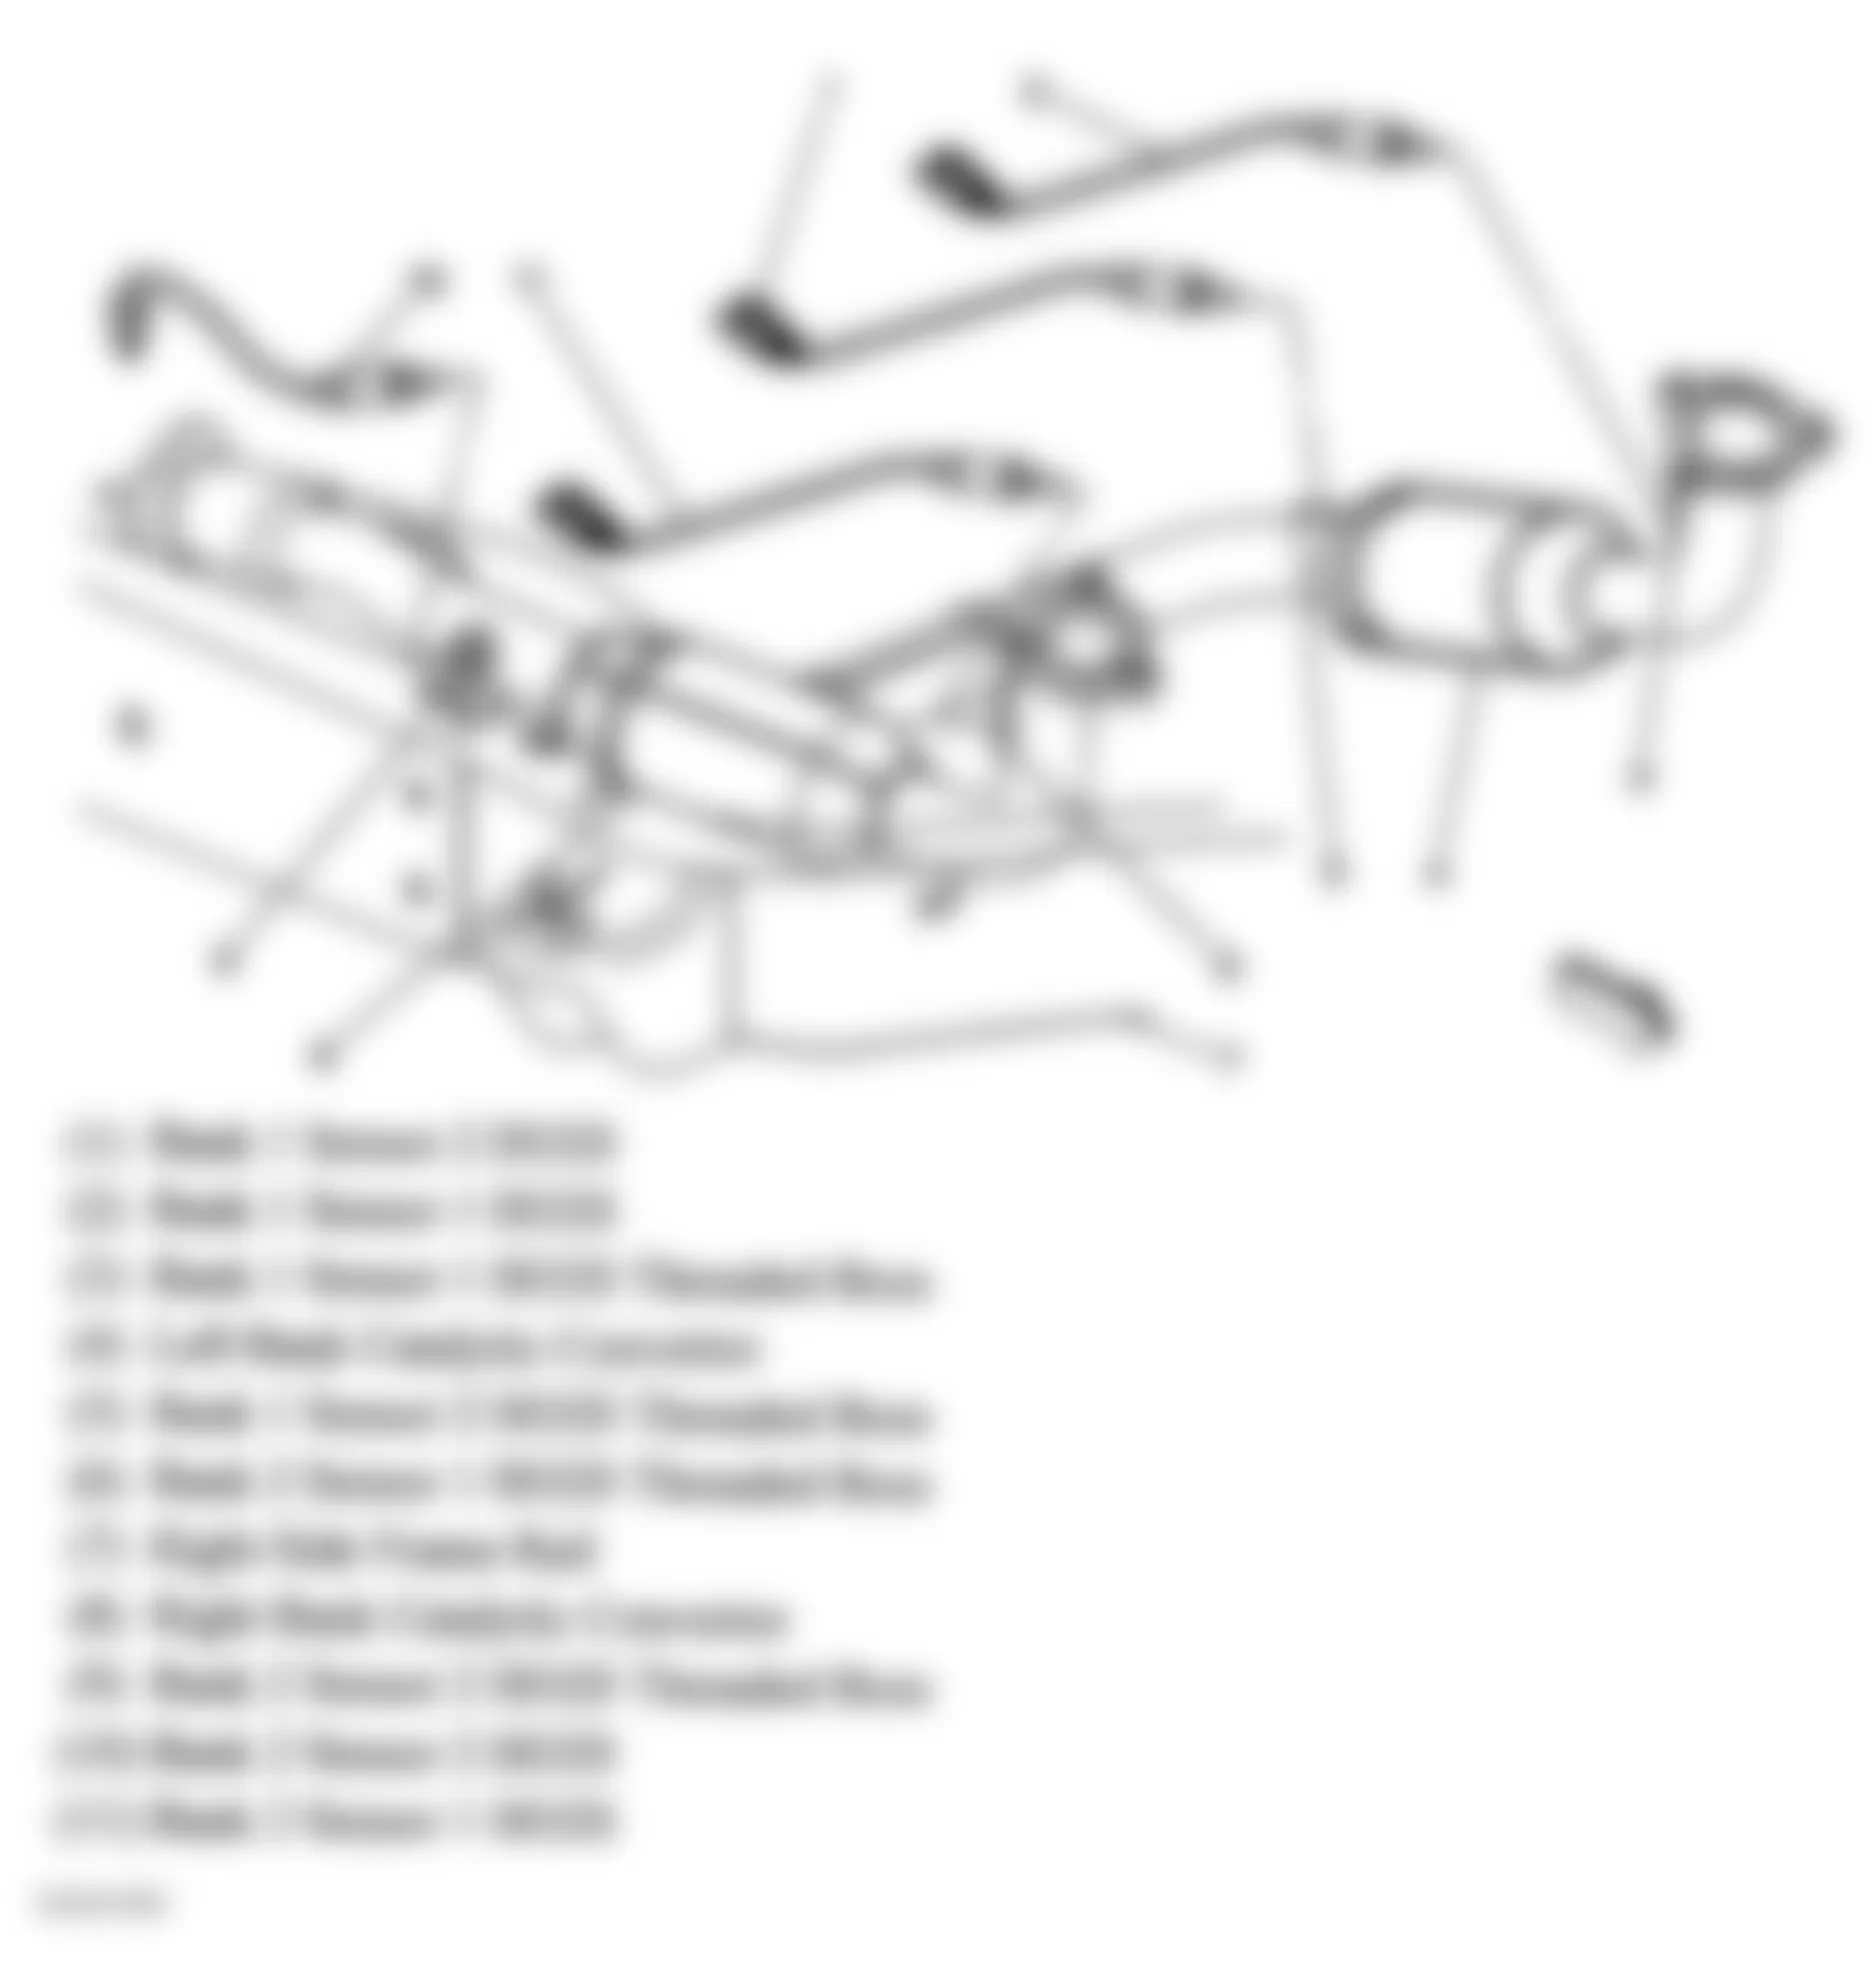 Chevrolet Avalanche 2500 2004 - Component Locations -  Exhaust System (4.8L & 5.3L)